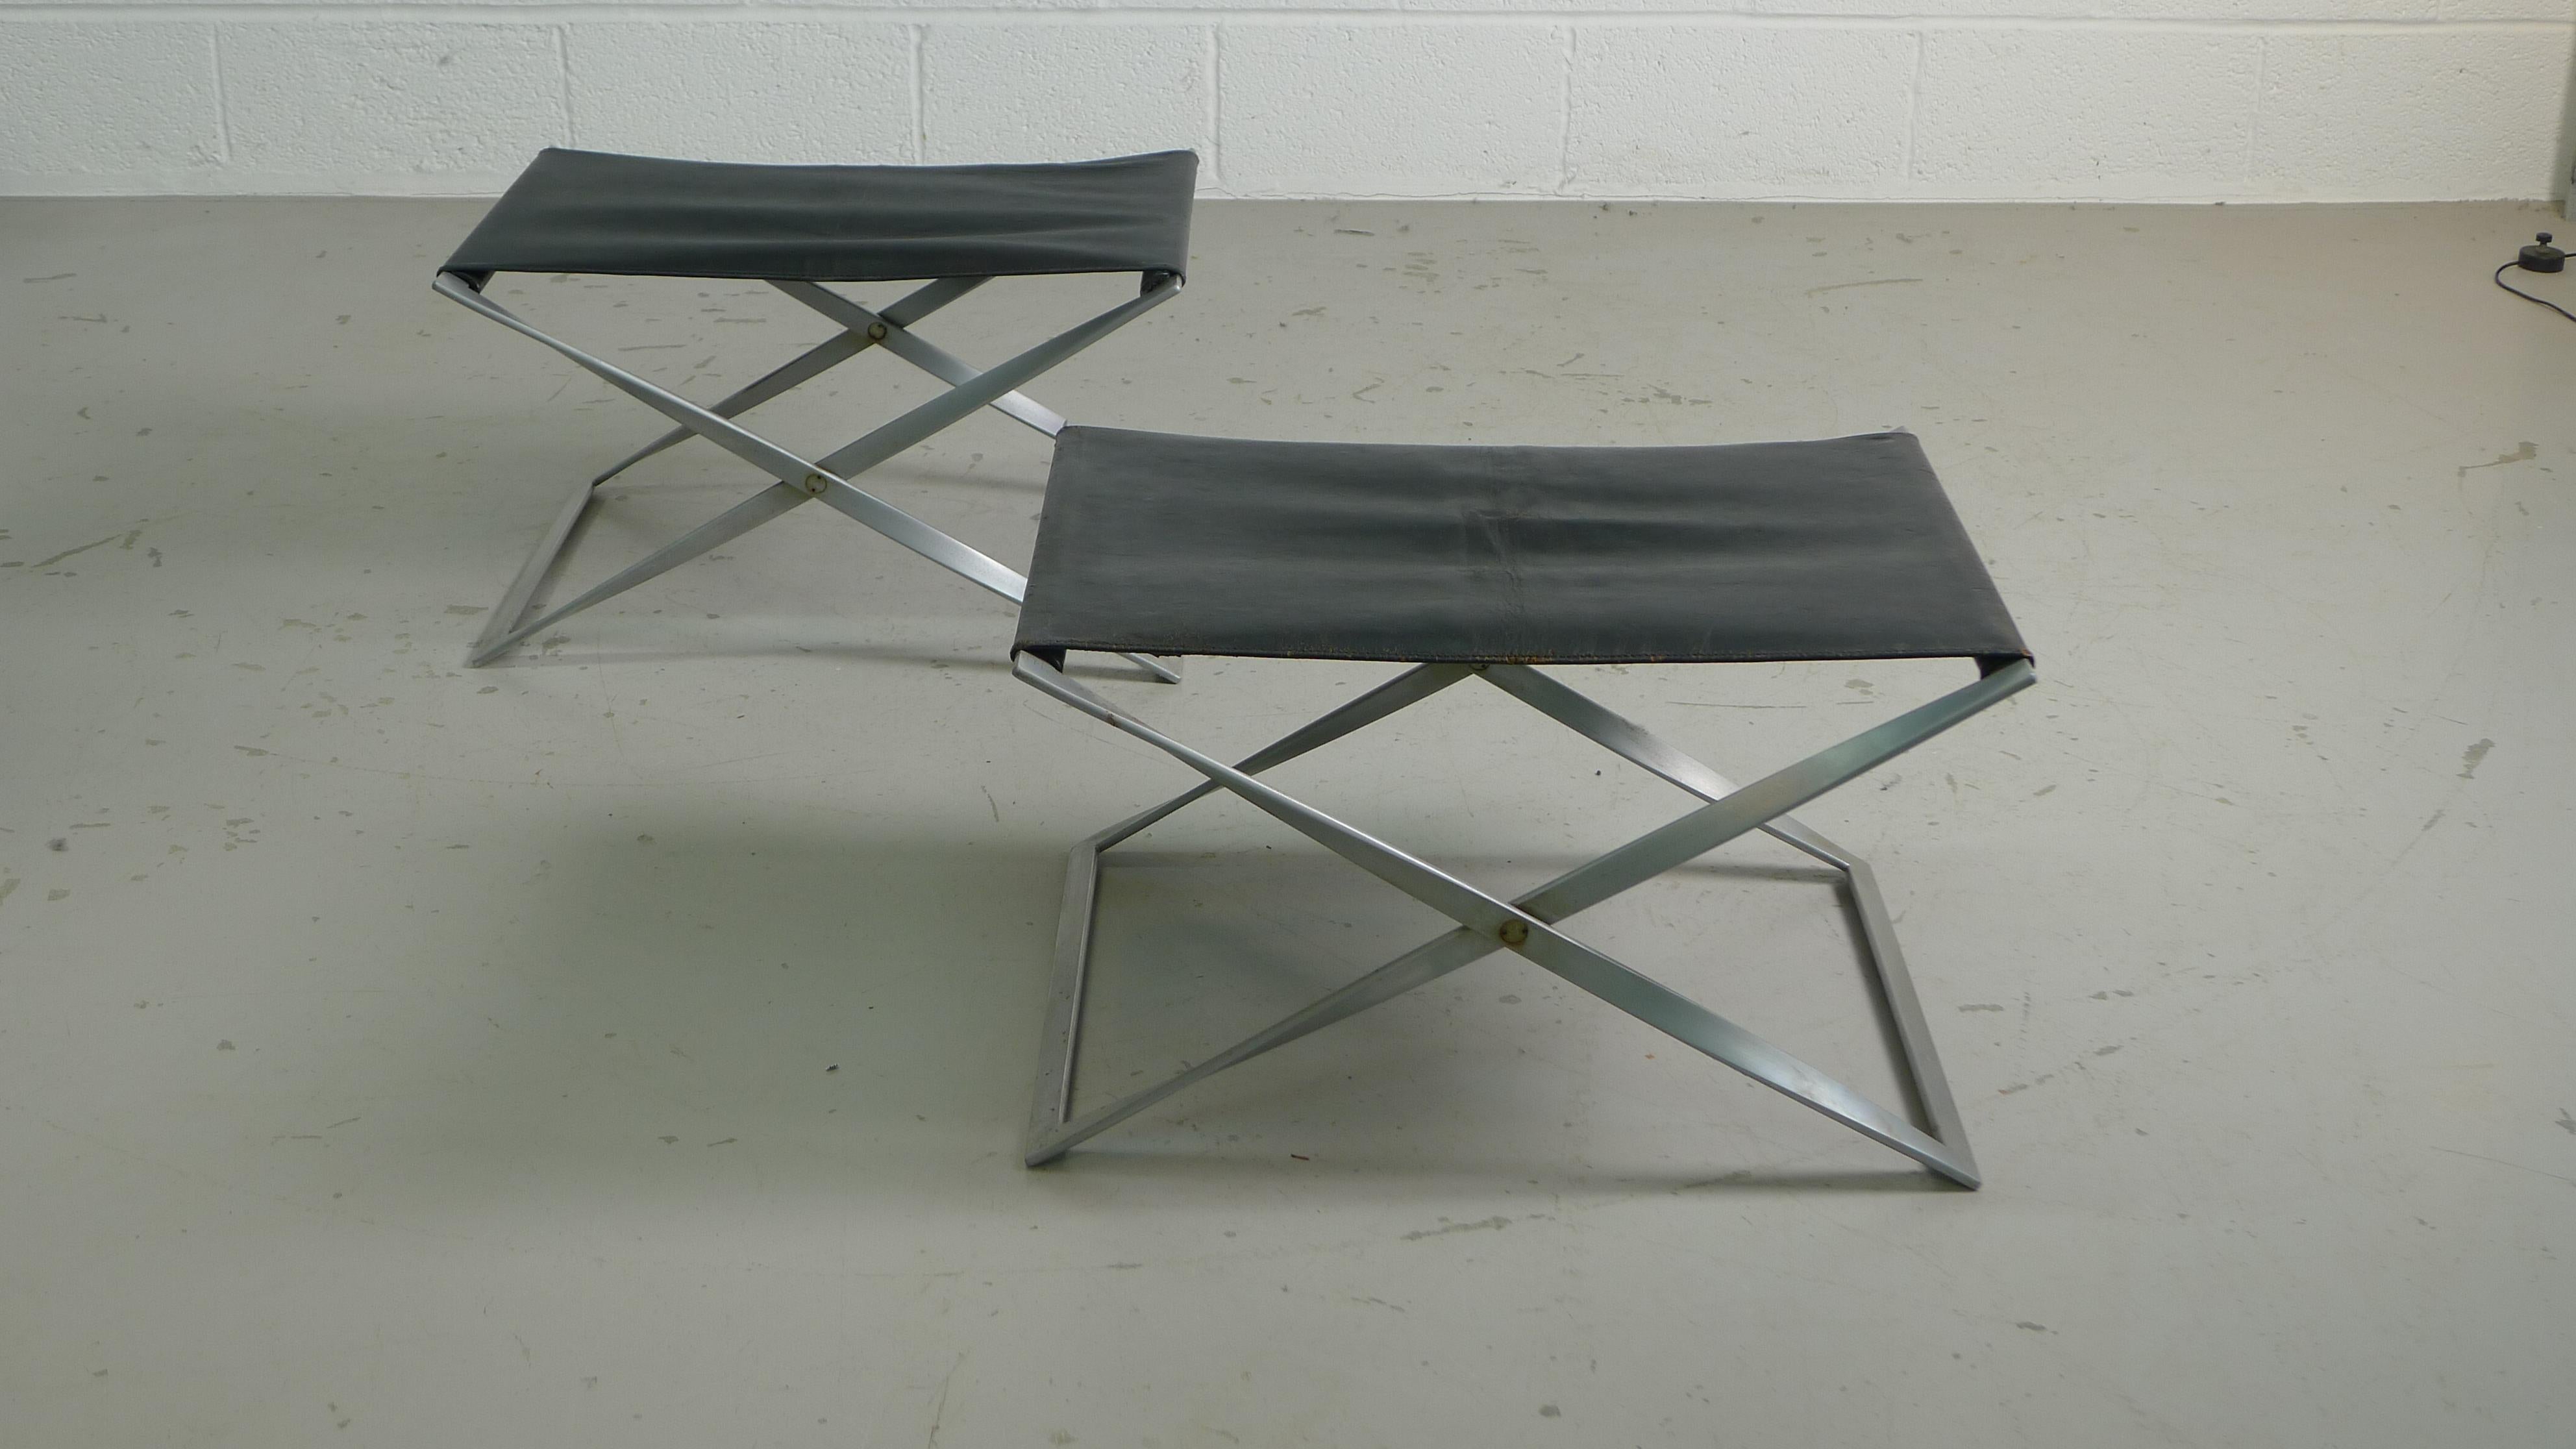 Poul Kjaerholm for E-Kold Christensen, Denmark, 1960s. PK-91 Folding Stools in chromed steel with the original black leather . Stool is stamped and displays the early stepped joints at the corners of the metal . 

Some minor pitting to metal